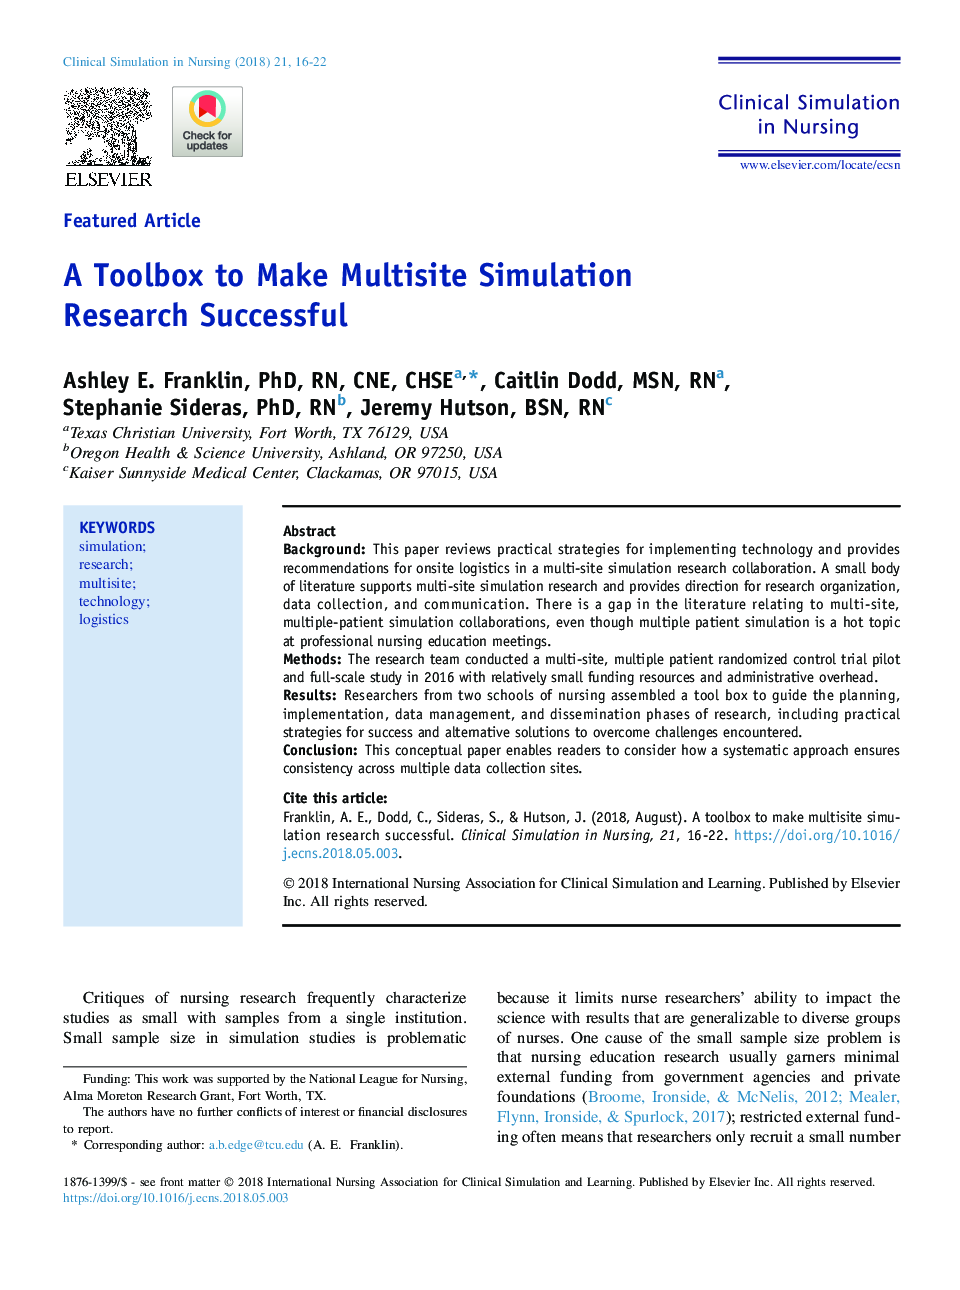 A Toolbox to Make Multisite Simulation Research Successful